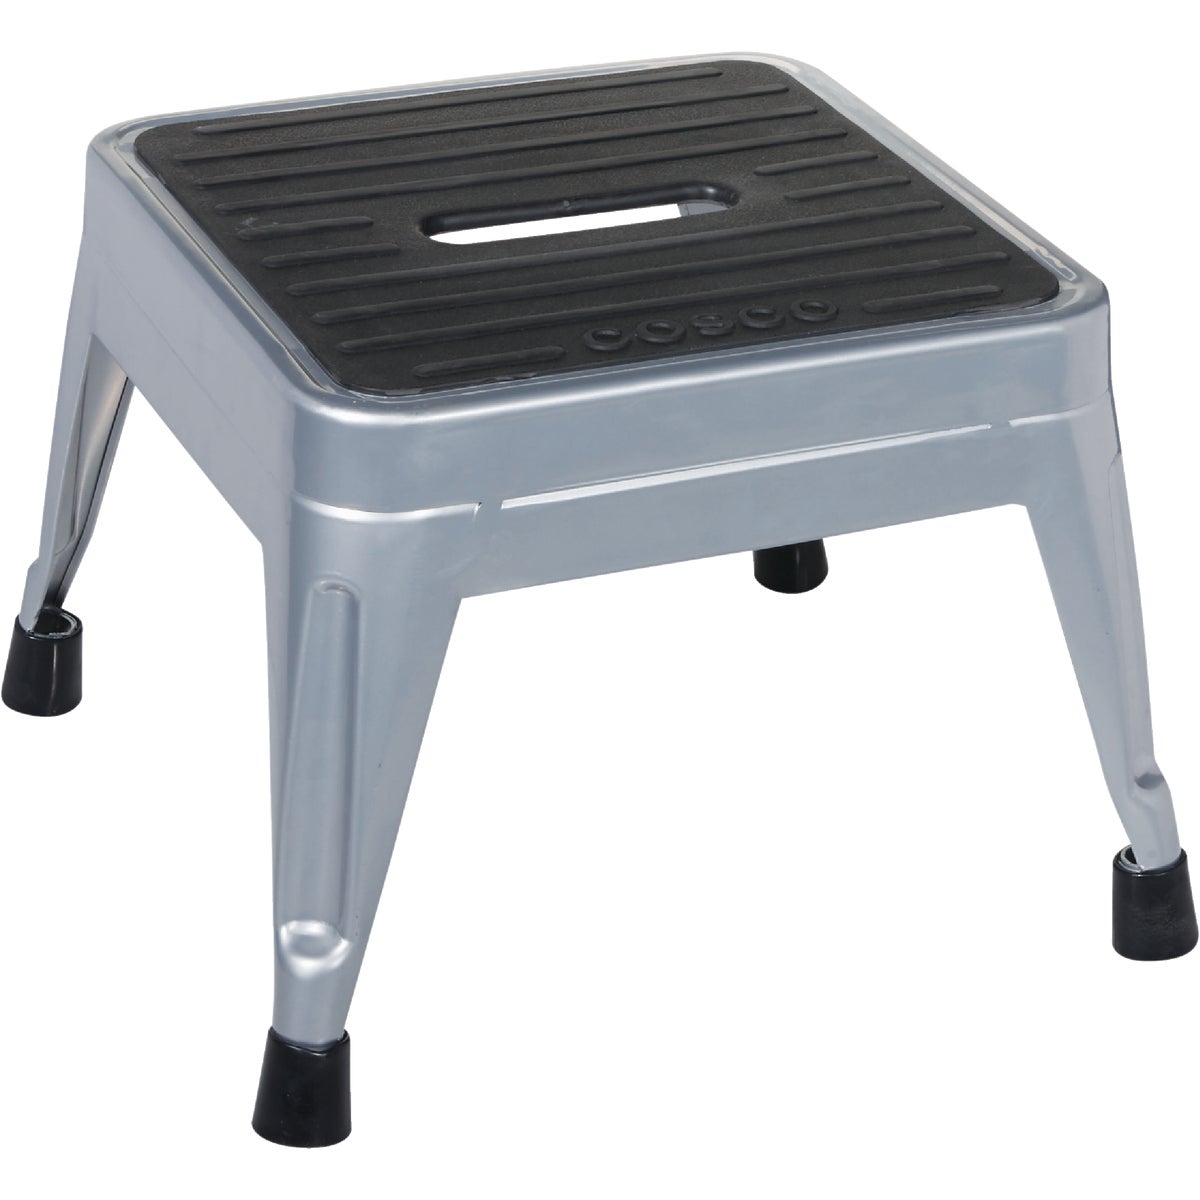 Item 601493, Metal step stool with black rubber tread on top and skid resistant feet.